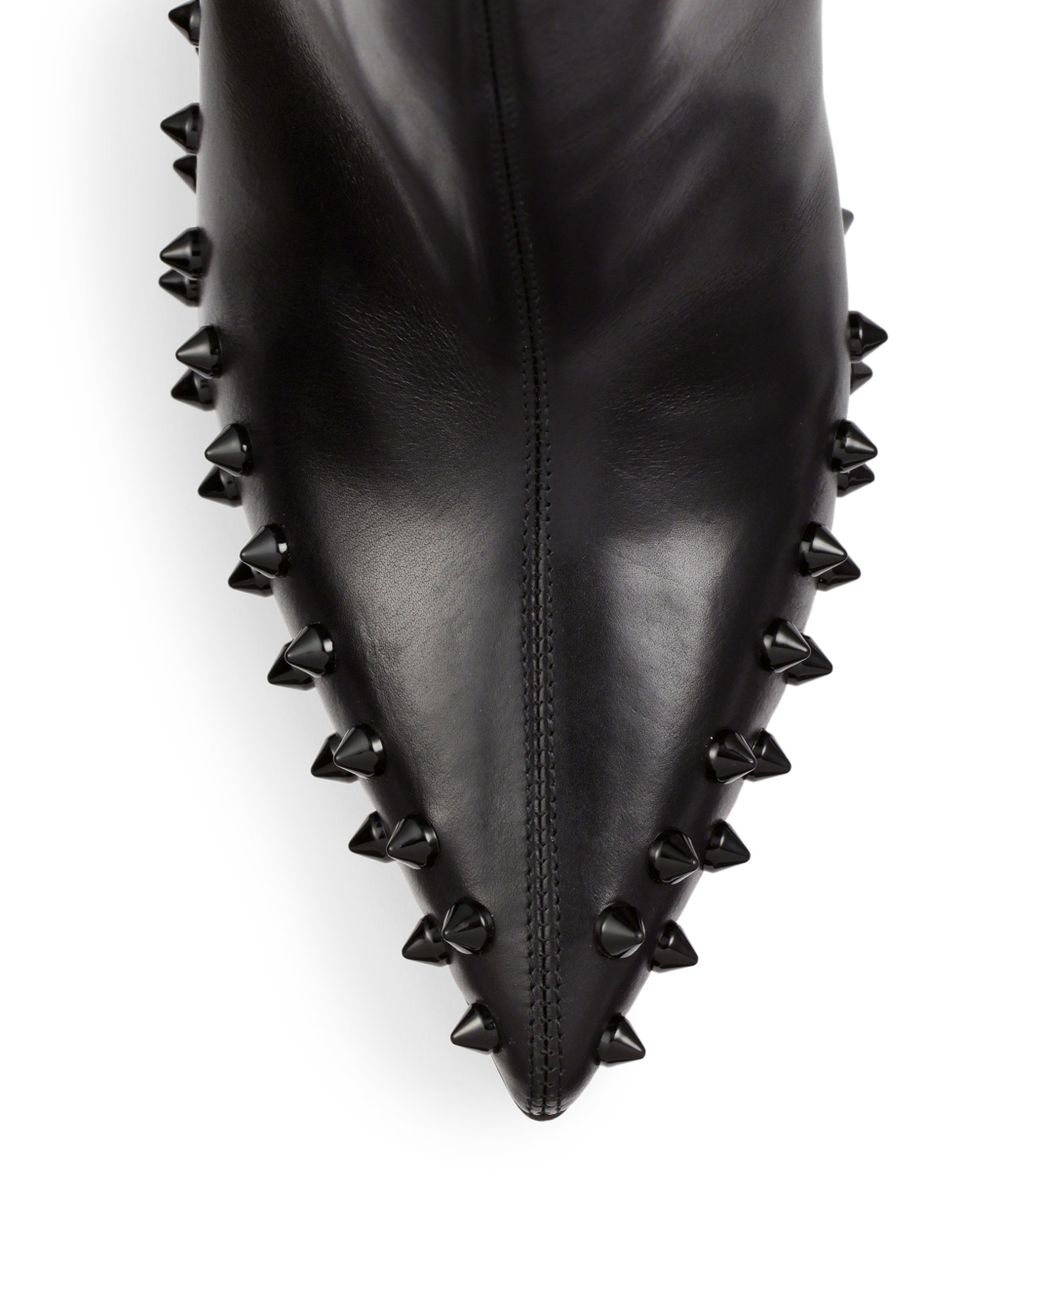 Christian Louboutin Willetta Studded Booties in Black